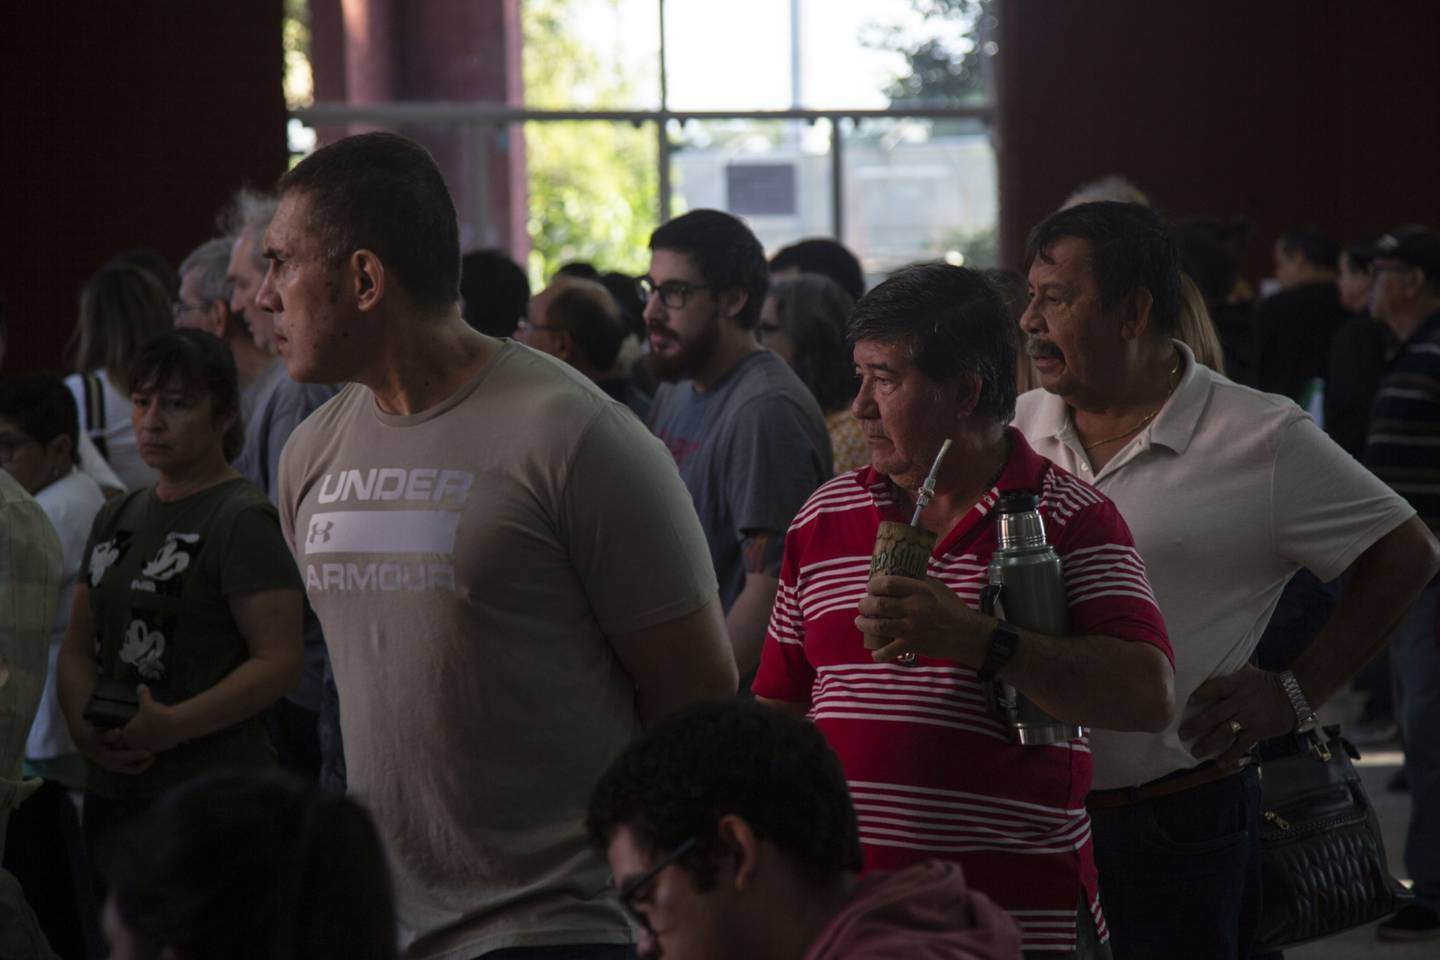 Voters wait in line to cast ballots at a polling station during presidential elections in Lambare, Paraguay, on Sunday, April 30, 2023.dfd